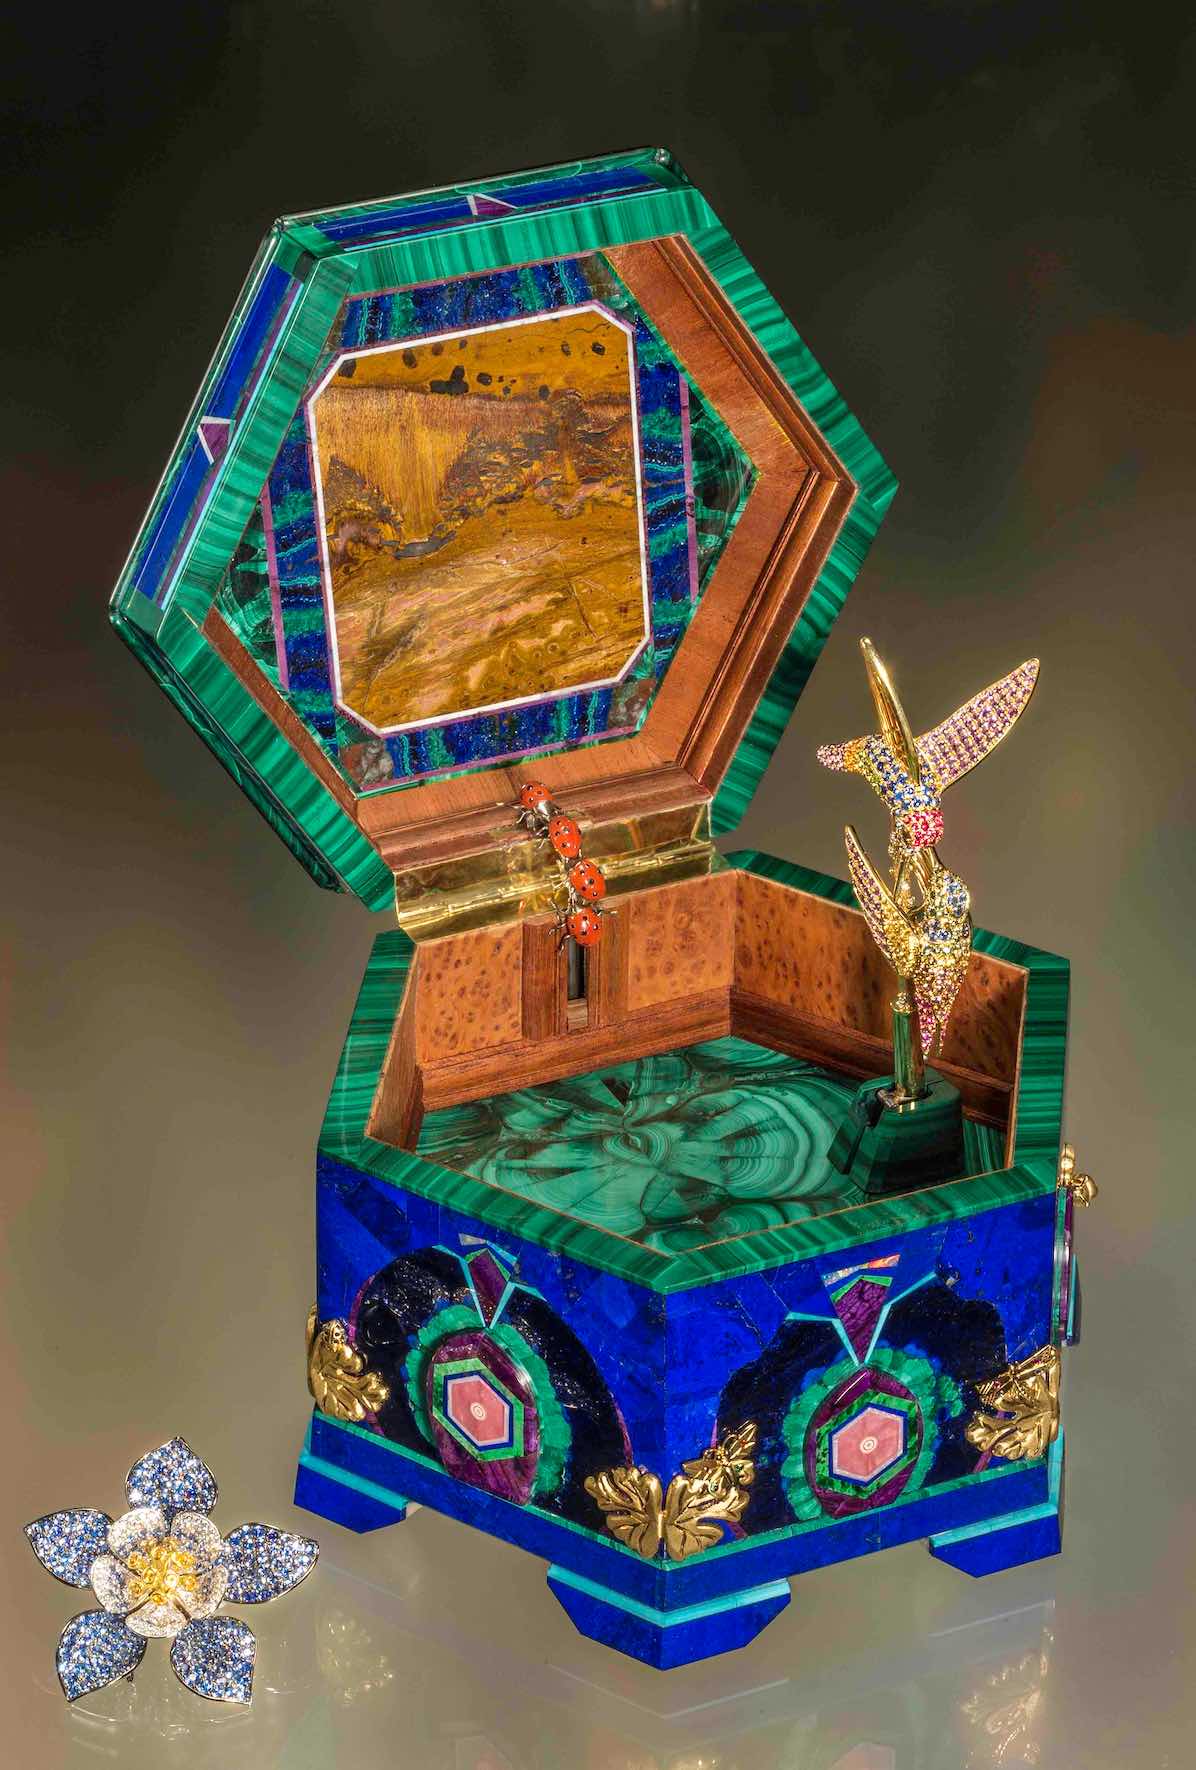 Garden of Delight Mystery Box, by Nicolai Medvedev (in collaboration with Paula Crevoshay)